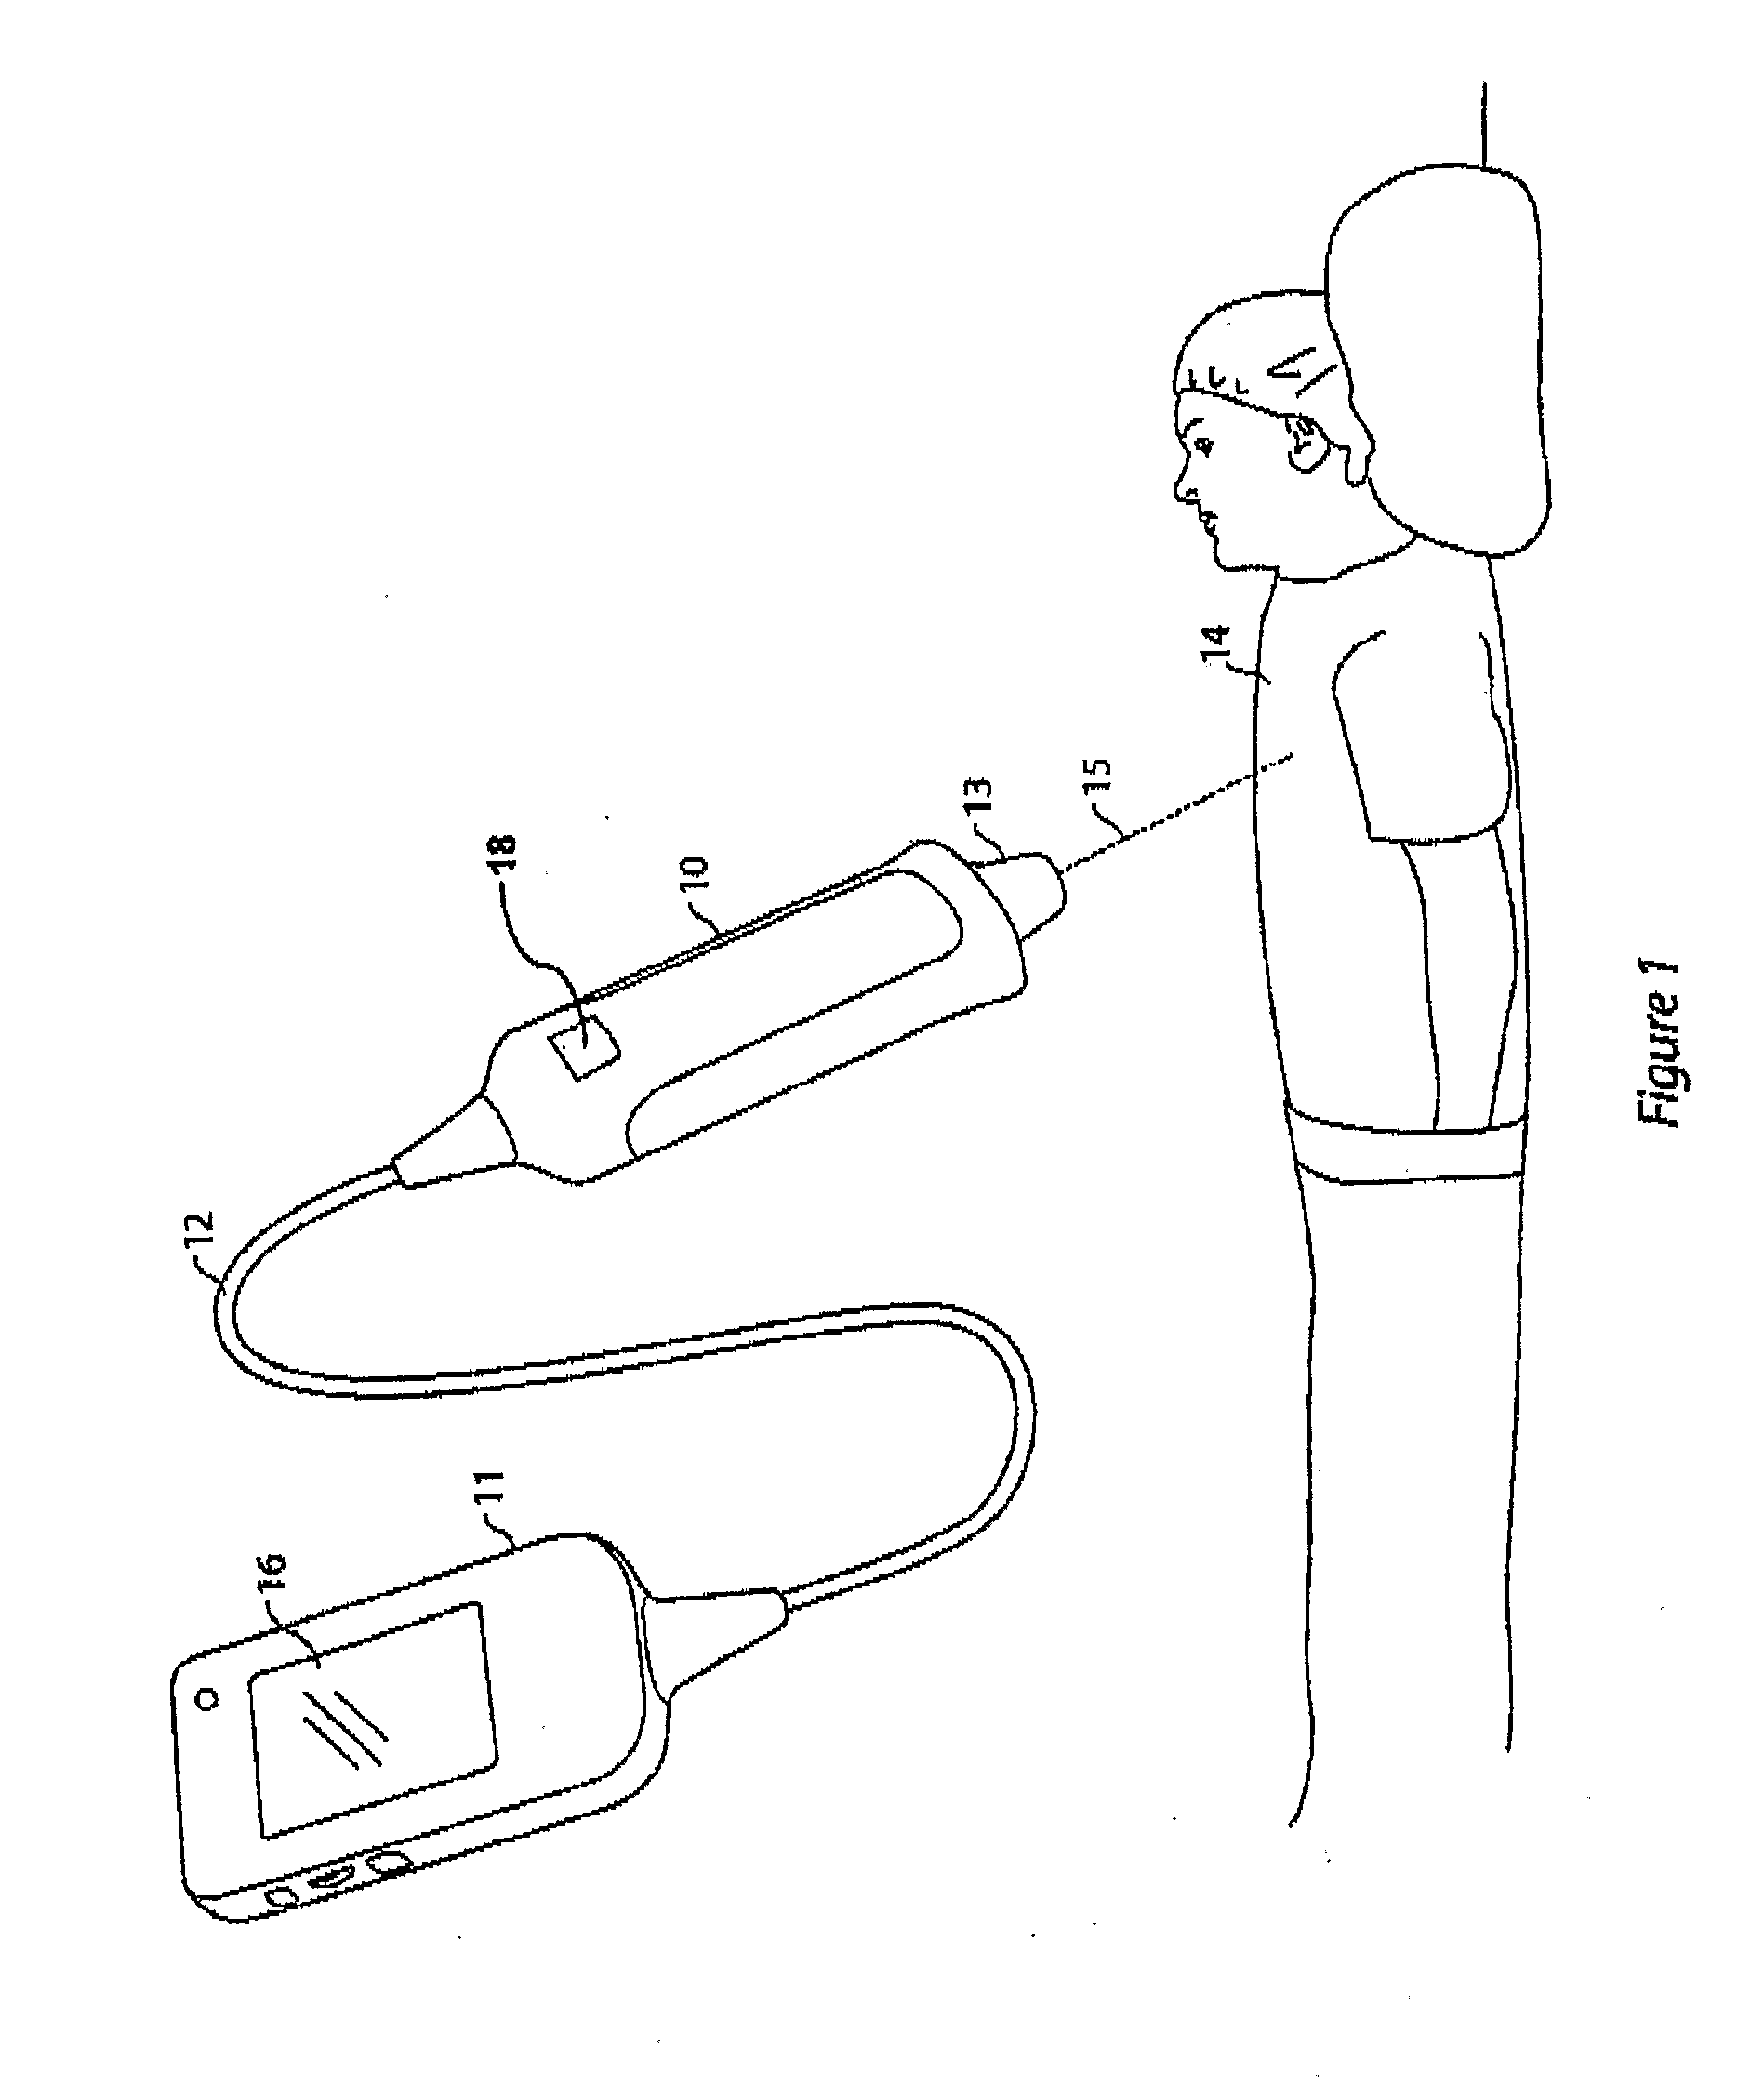 Medical scanning apparatus and method